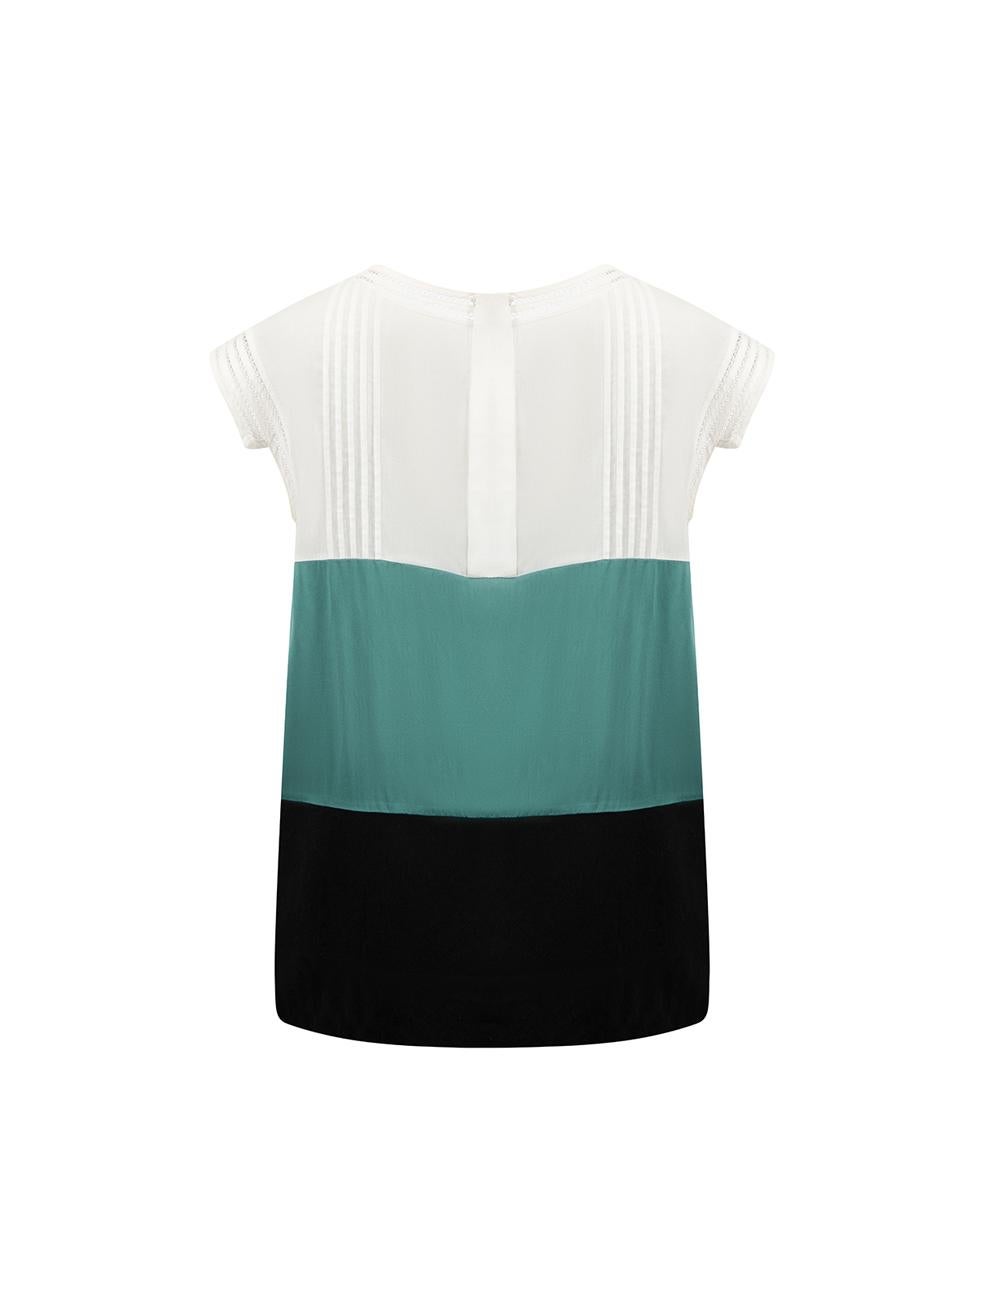 See by Chloé Colour Block Lace Interest Top Size S In Good Condition In London, GB